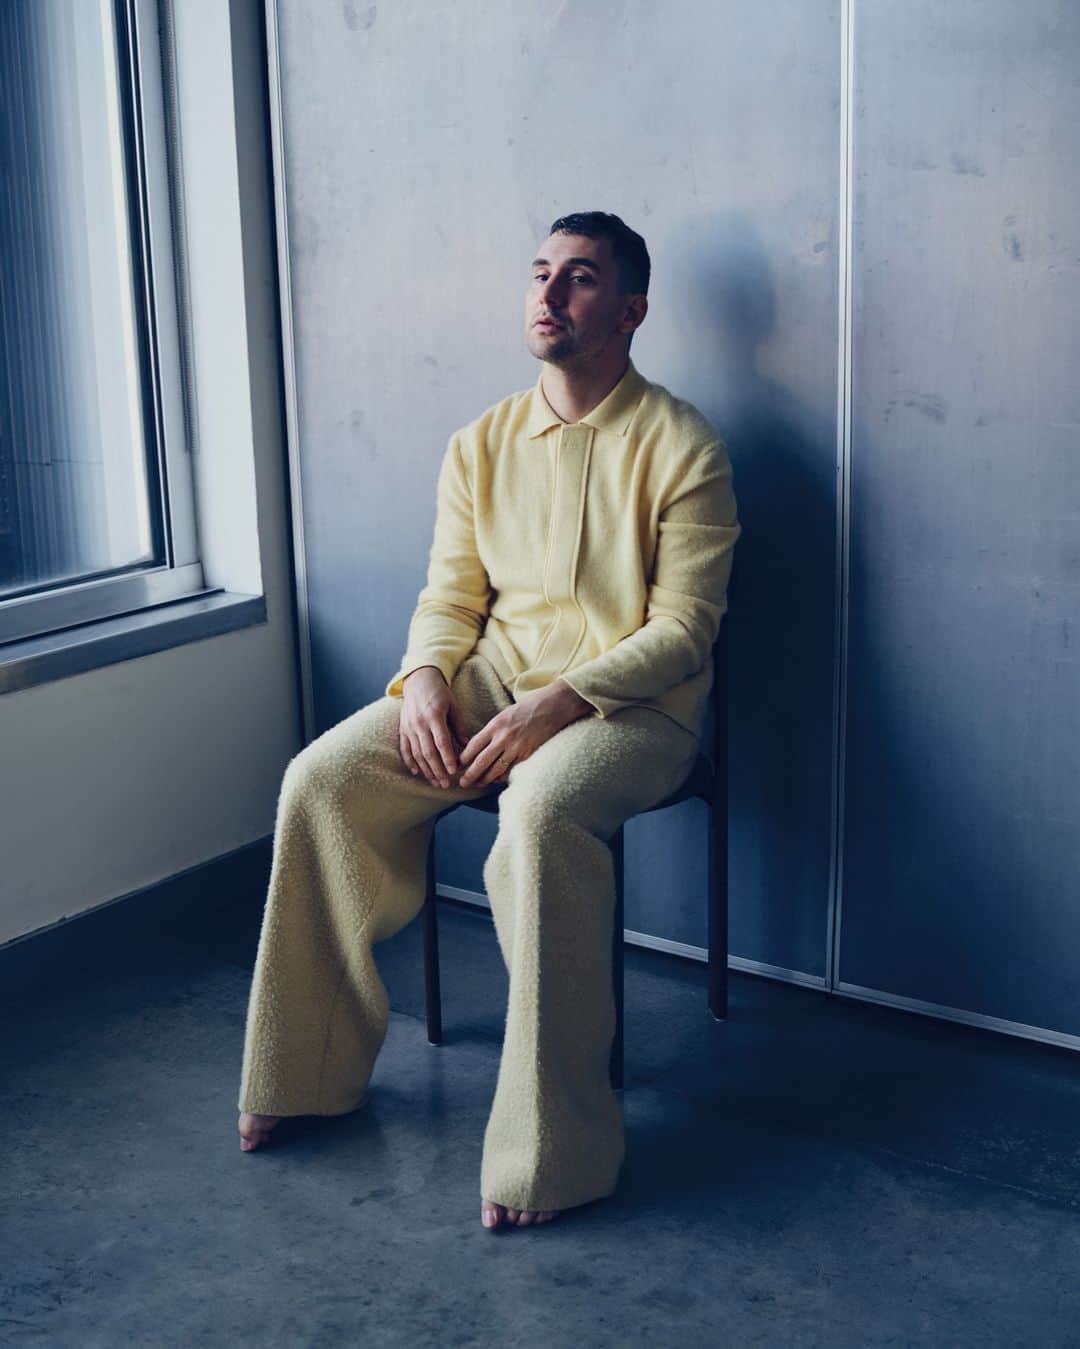 ZOO Magazineのインスタグラム：「ZOO MAGAZINE ISSUE #81: A PERFECT DAY  Jack Antonoff by Bryan Adams shot and interviewed exclusively for ZOO MAGAZINE 81 - ZOO MAGAZINE 20 YEARS  Full look: ZEGNA @zegnaofficial @alessandrosartoriofficial  Photographer: Bryan Adams @bryanadams Talent: Jack Antonoff @jackantonoff  Stylist: Tom Kivell @tomkivell_stylist @seemanagement Hair and Makeup: Kevin Ryan @kevinryanhair @artandcommerce  Photographer’s Assistant: Edward Smith Stylist’s Assistants: Peter Hallberg Creative Director: @patriciavillirillo Publicist: @huxley, a special thank you to Nic Bestley and Micaela Cohen  Location: Pier59 Studios, STUDIO 9 @pier59studios Interview: Jim Butler  #ZooMagazine #20YEARSZOOMAGAZINE」